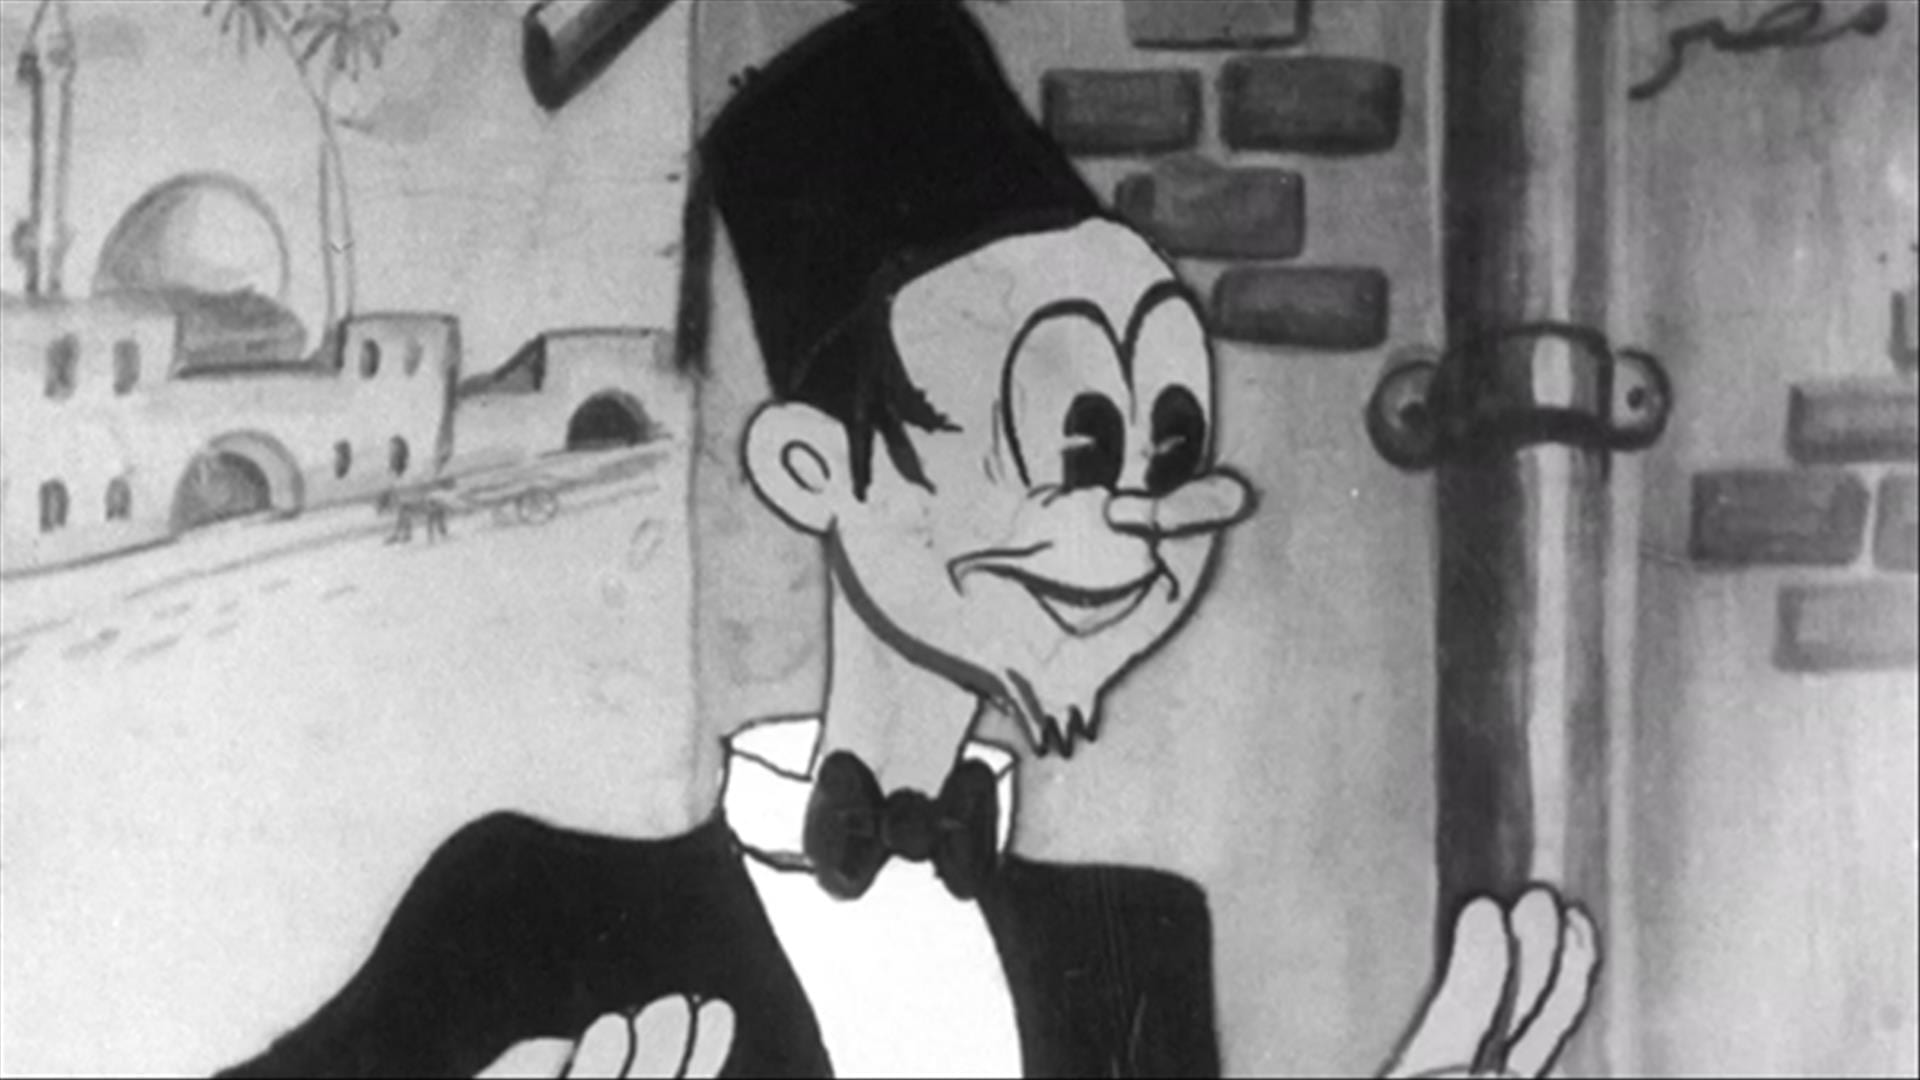 Mish Mish Effendi, the Egyptian cartoon hero created by the Frankels